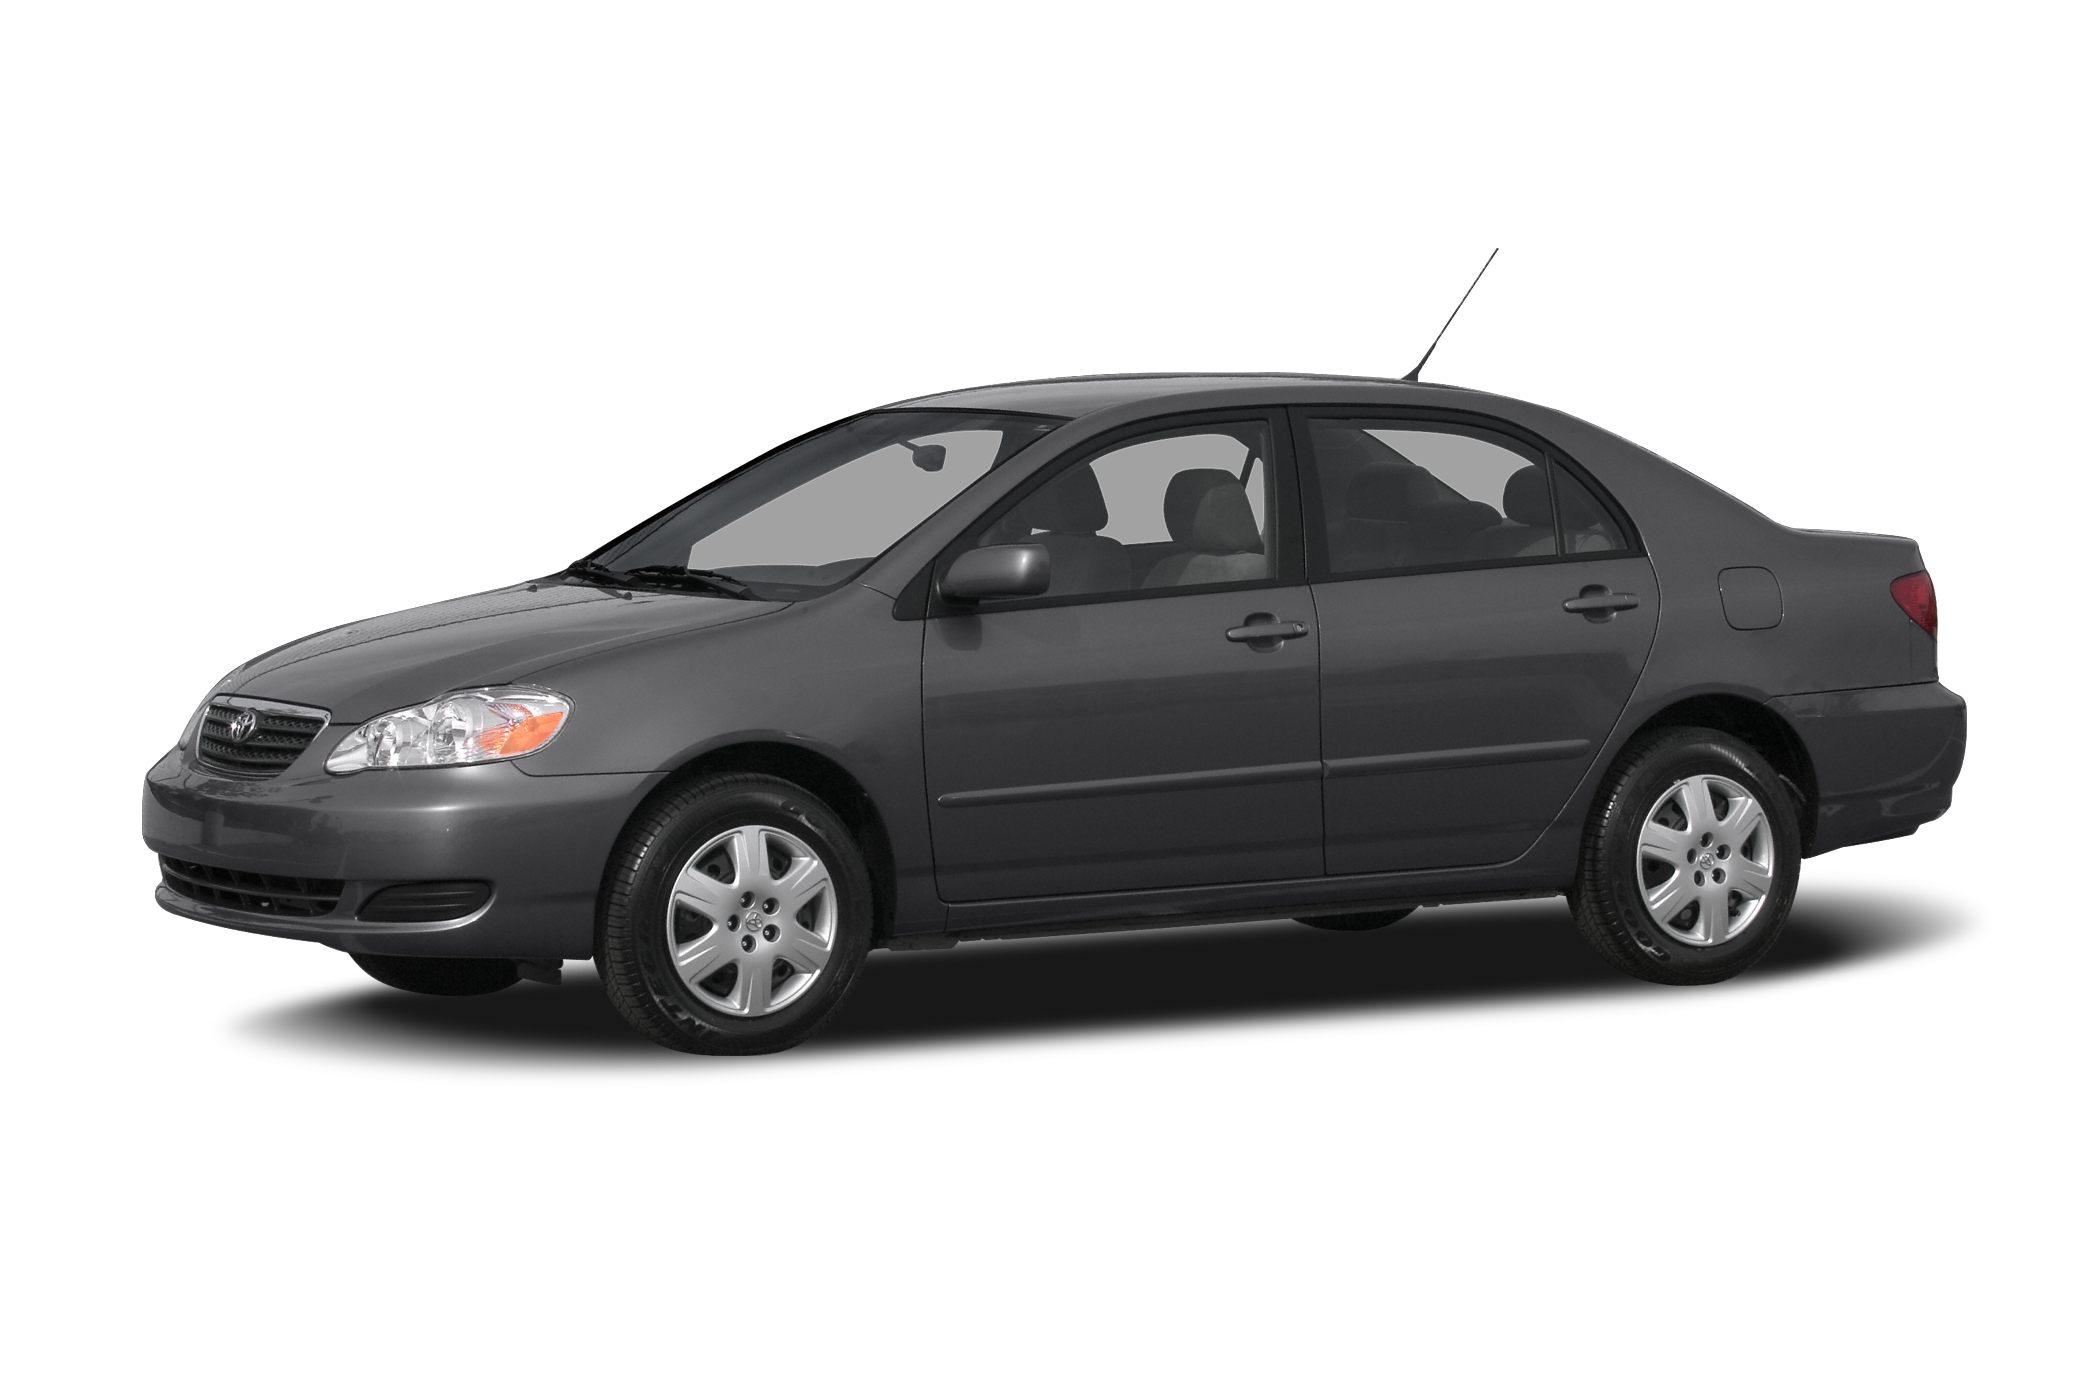 Used 2008 Toyota Corolla Values Cars For Sale Kelley Blue Book